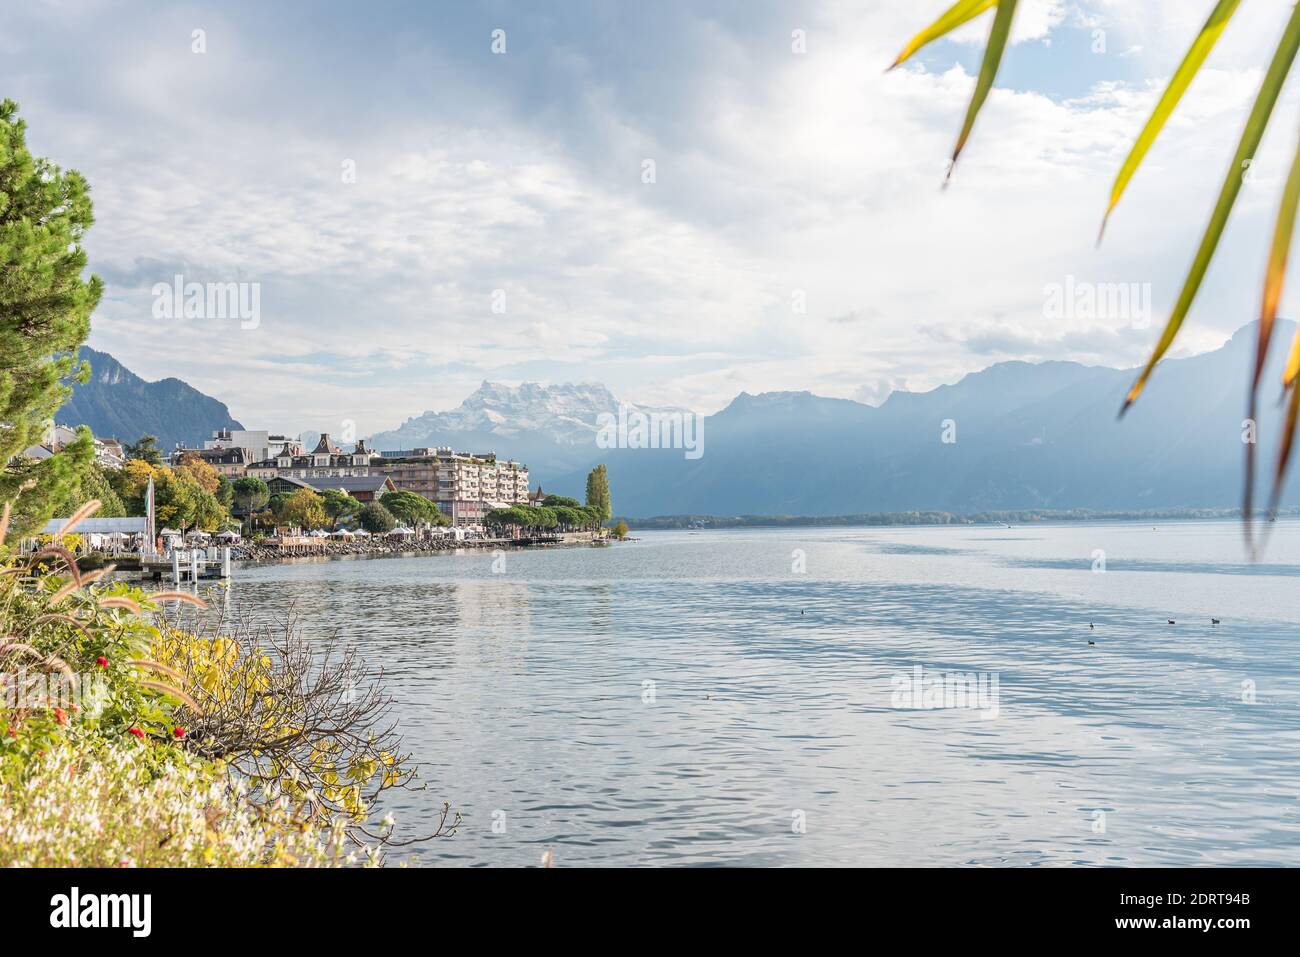 Alpine lake shore surrounded by snowy peaks and a town in the shore. Montreux, Lake Geneva in Switzerland Stock Photo